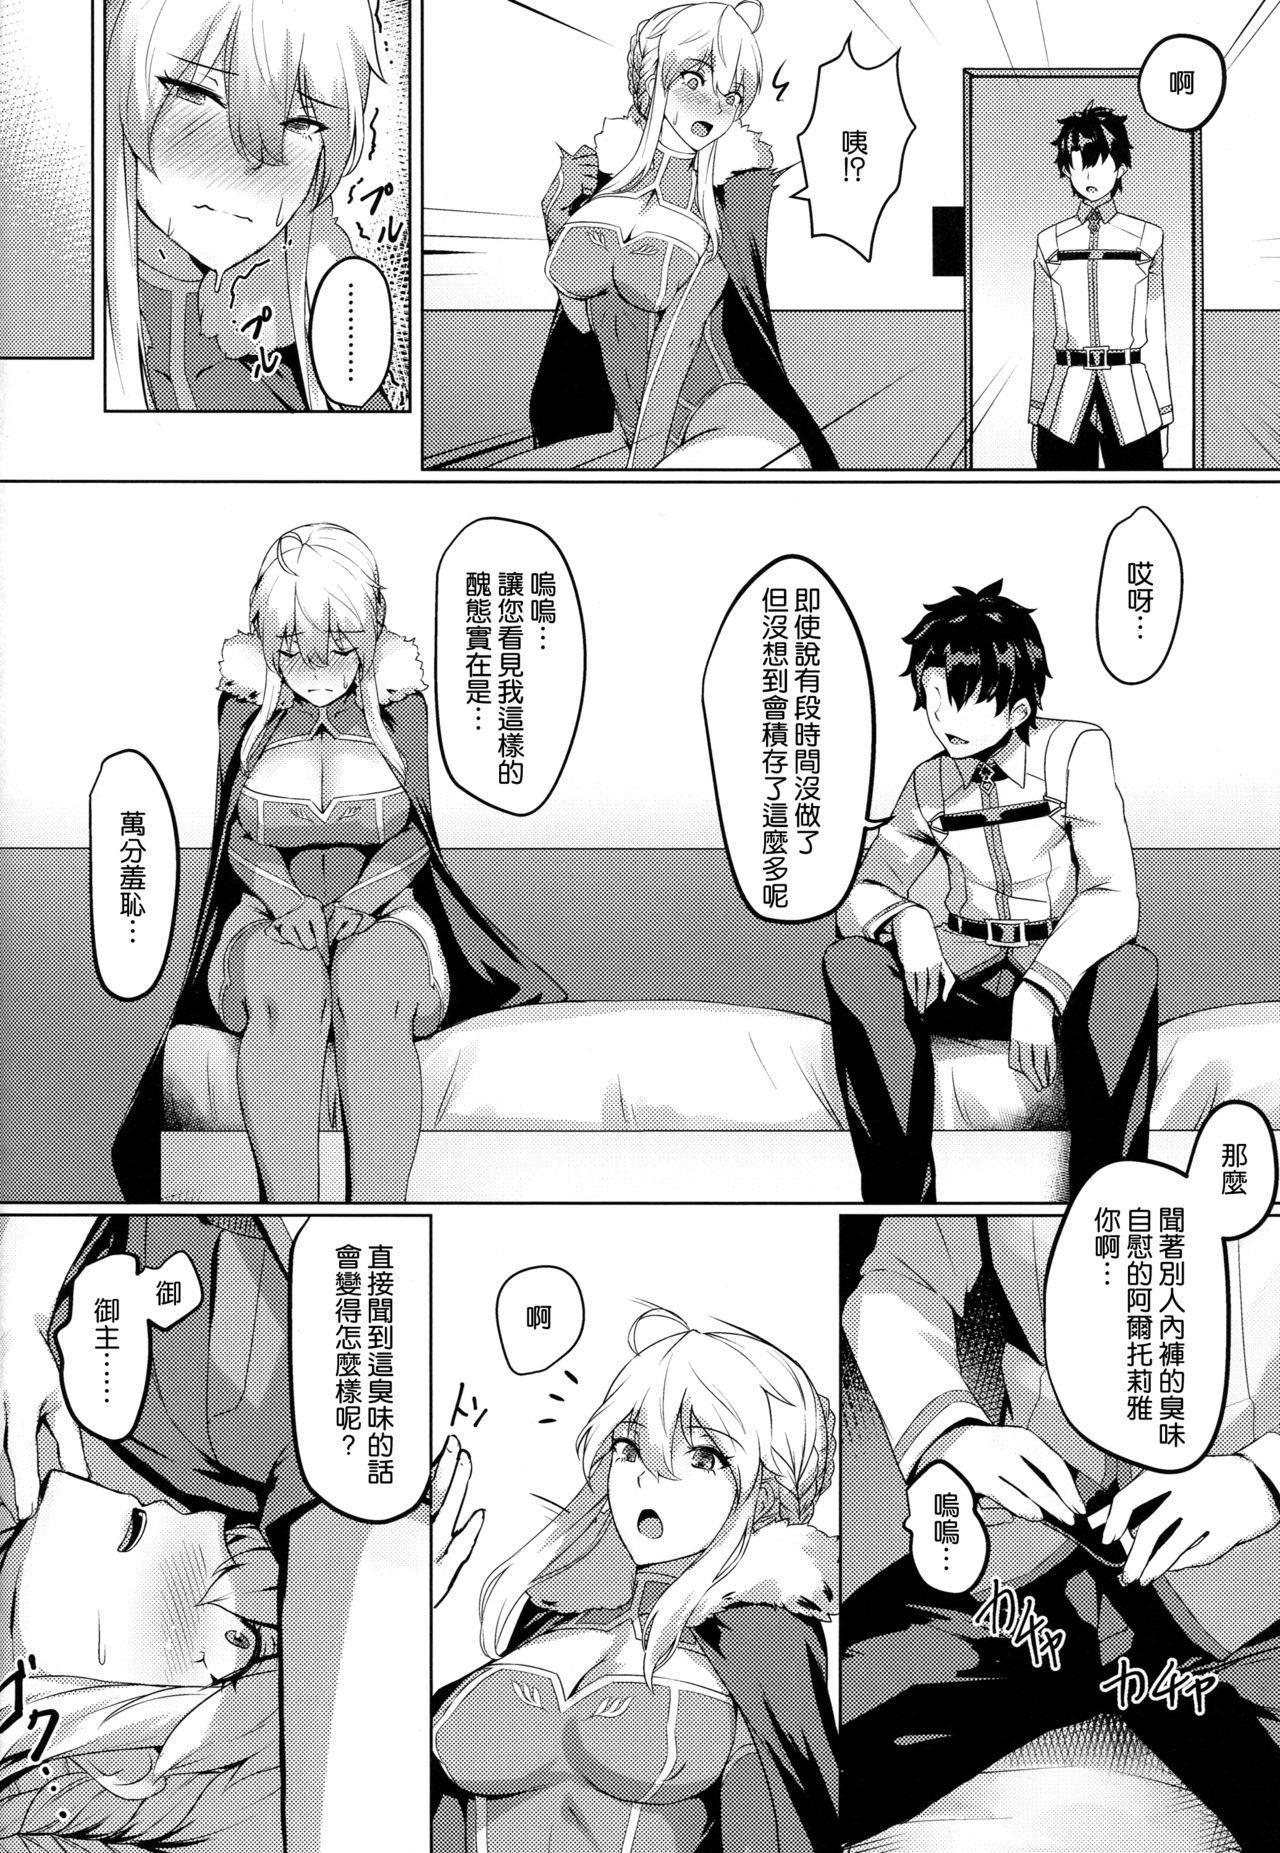 Older Like Attracts Like - Fate grand order Ecuador - Page 6